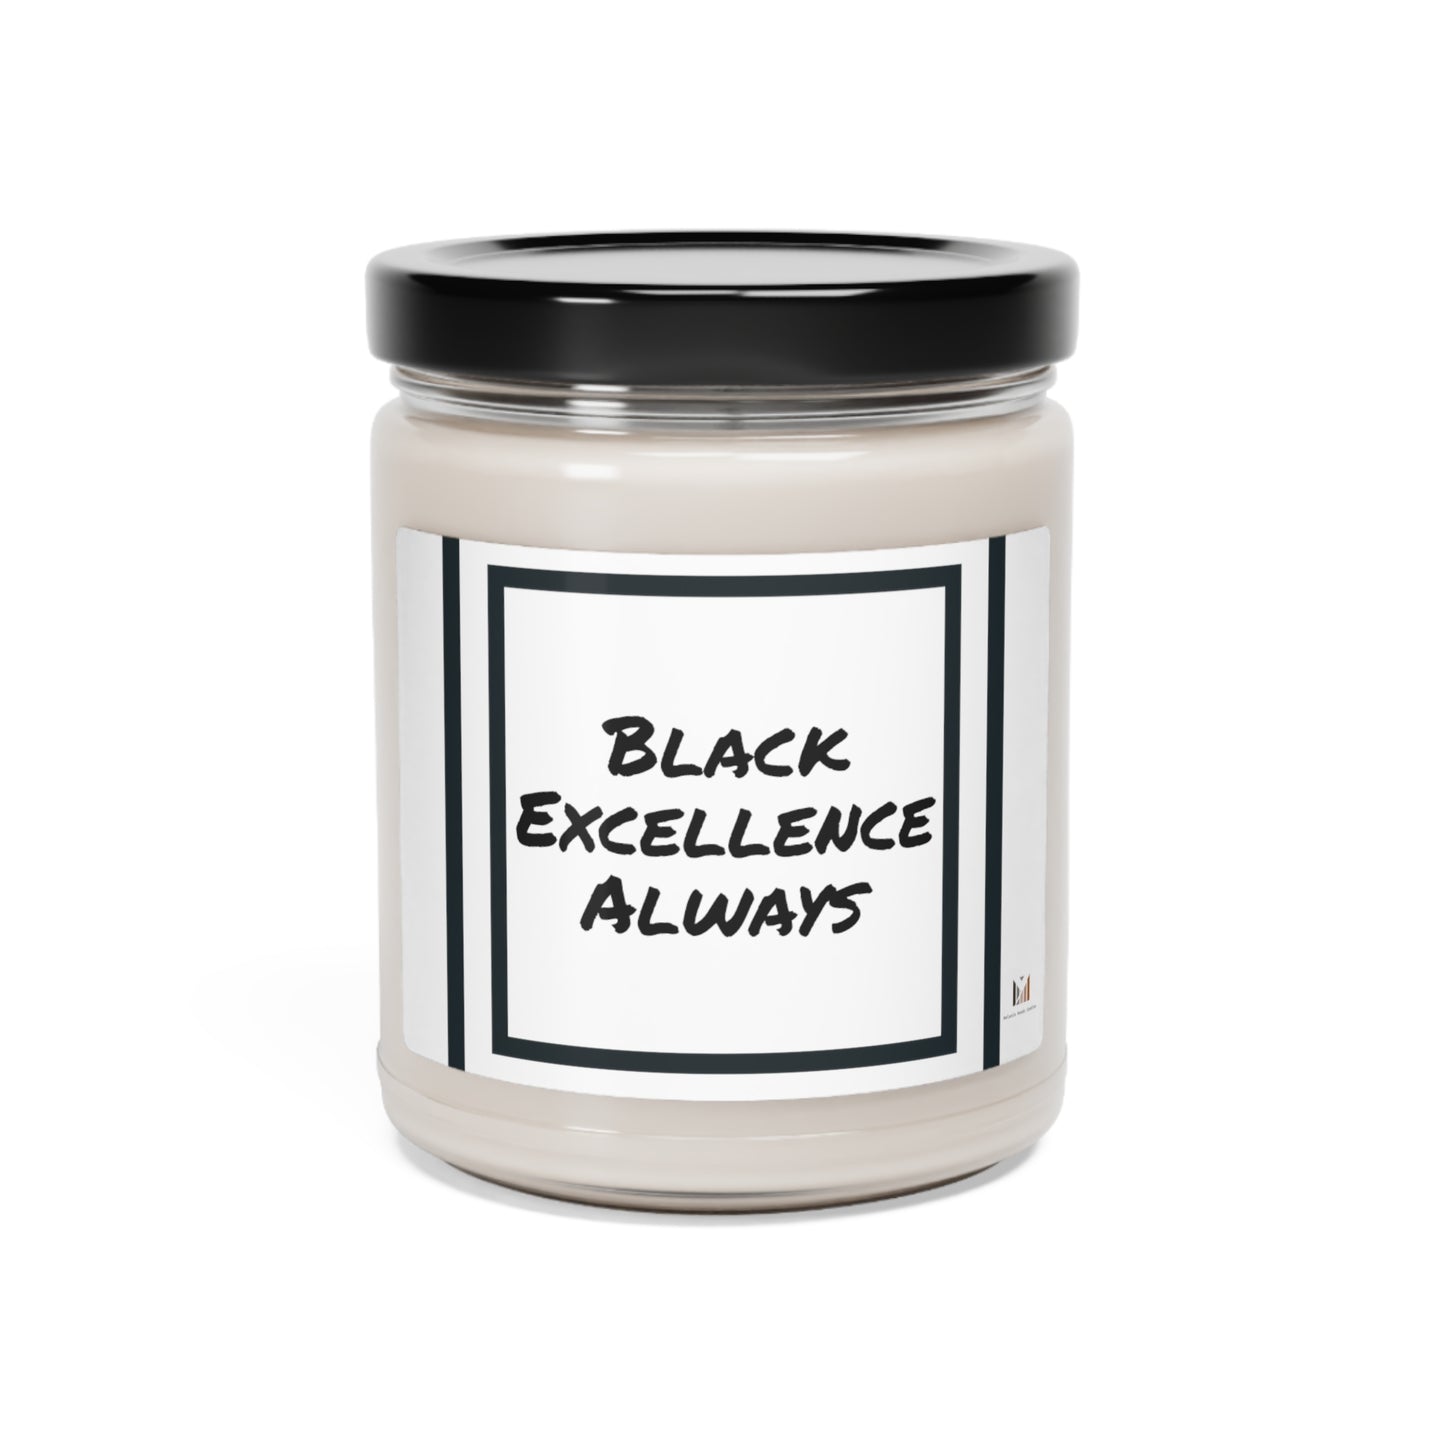 "Black Excellence" Scented Soy Candle, 9oz